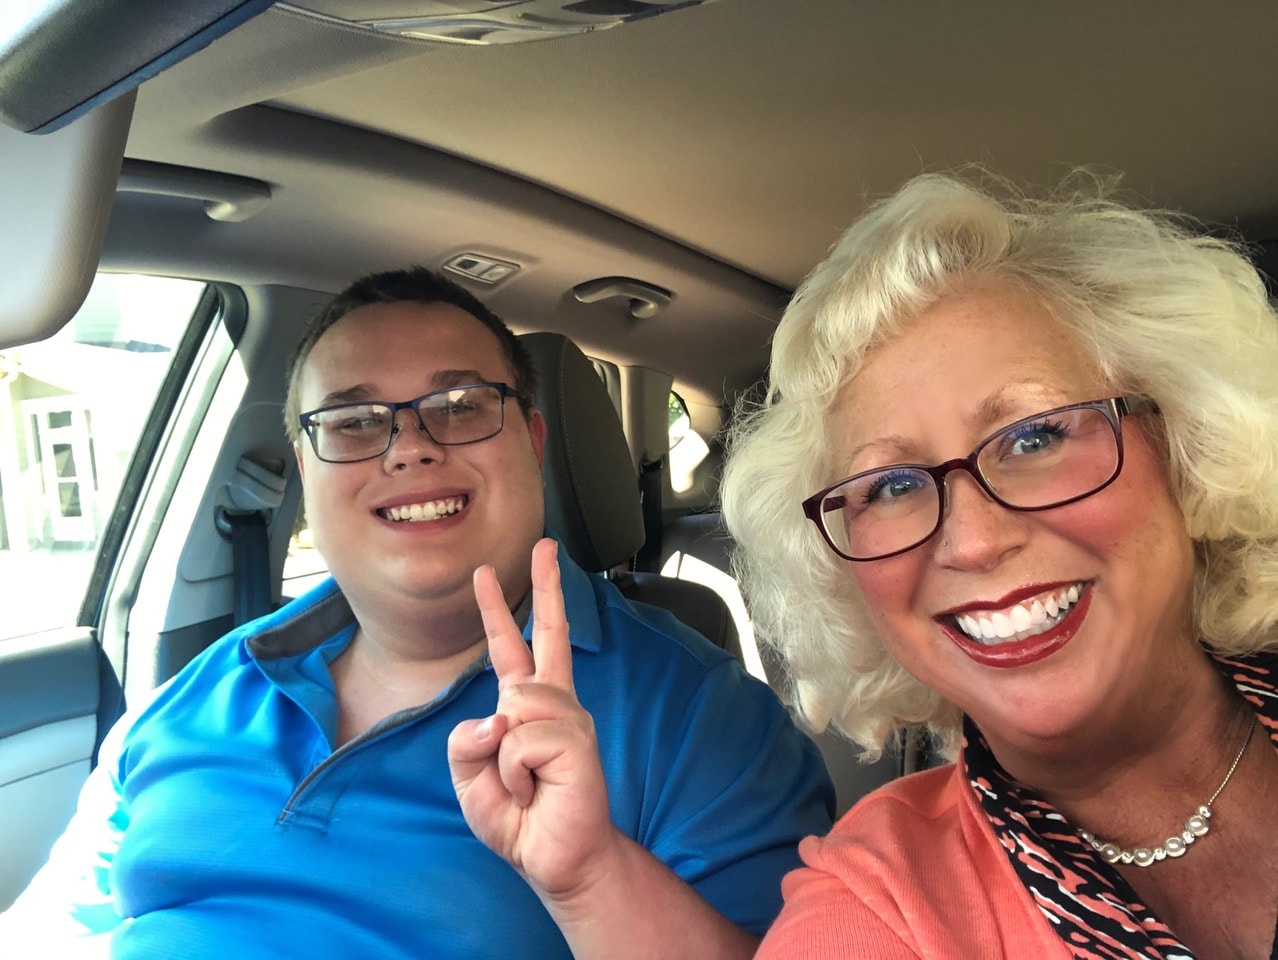 Diane Tabor taking a selfie with her son, who attends Georgia Connections Academy